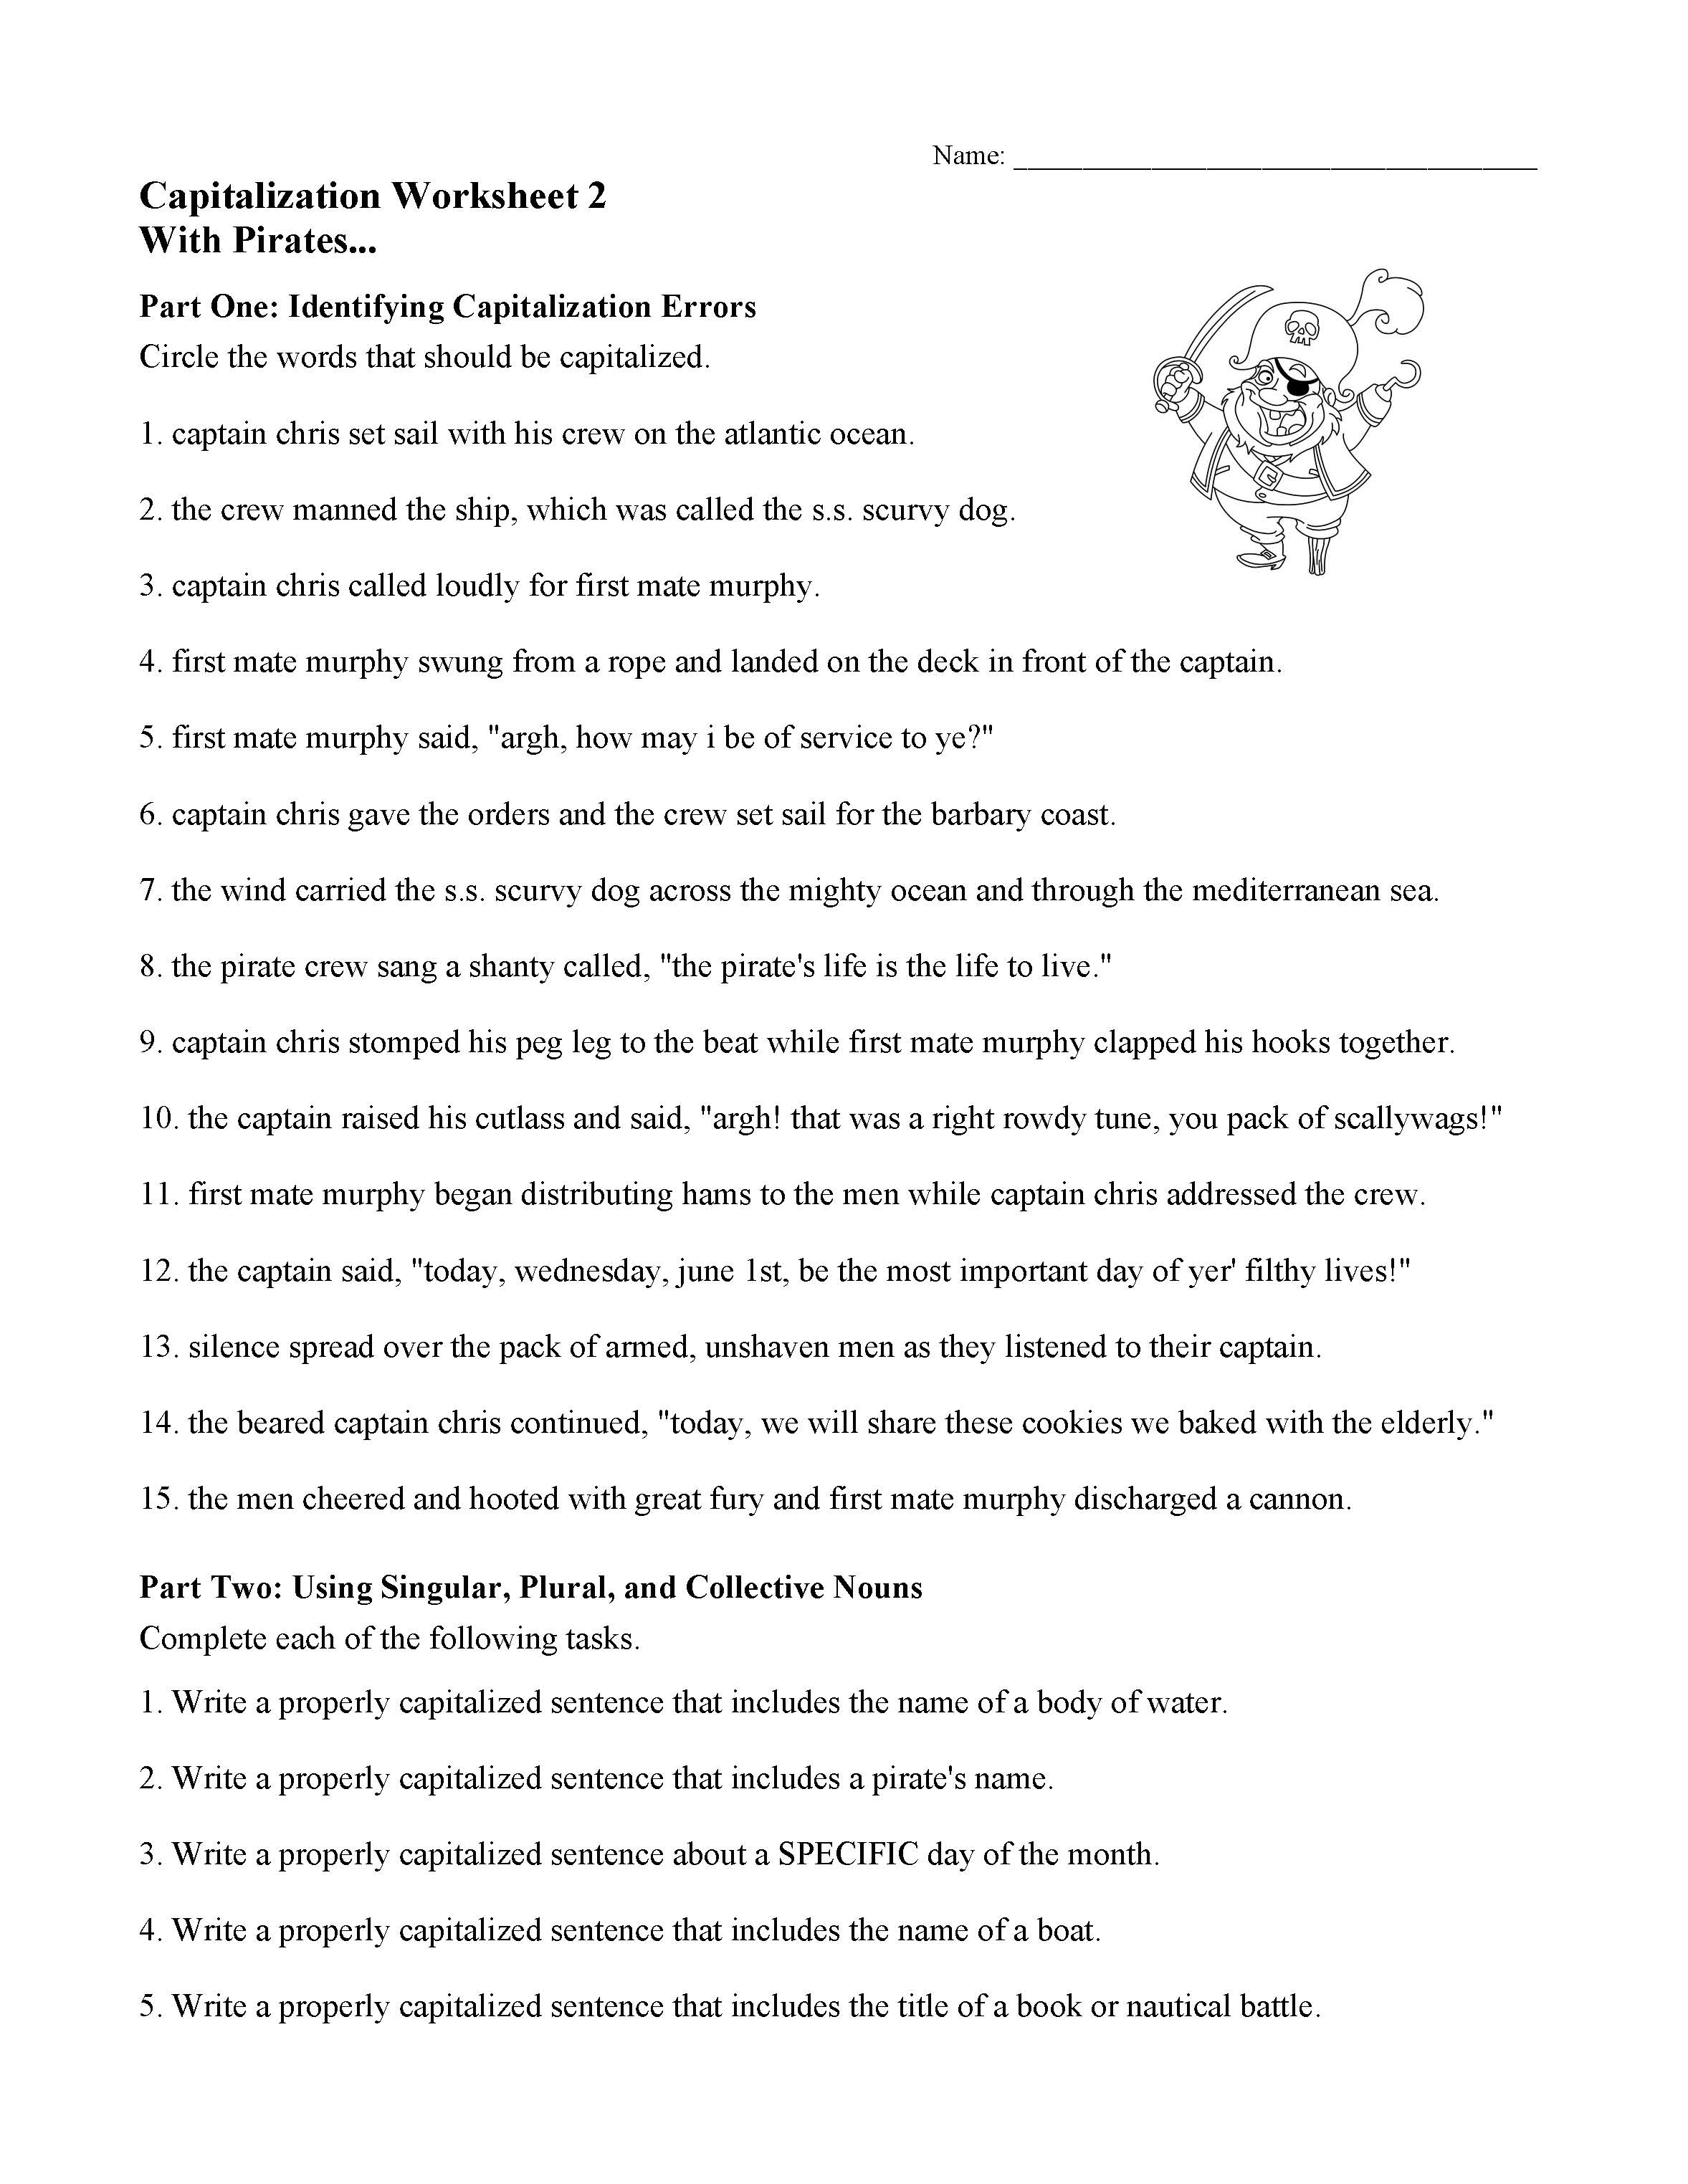 capitalization-worksheet-2-with-pirates-free-download-goodimg-co